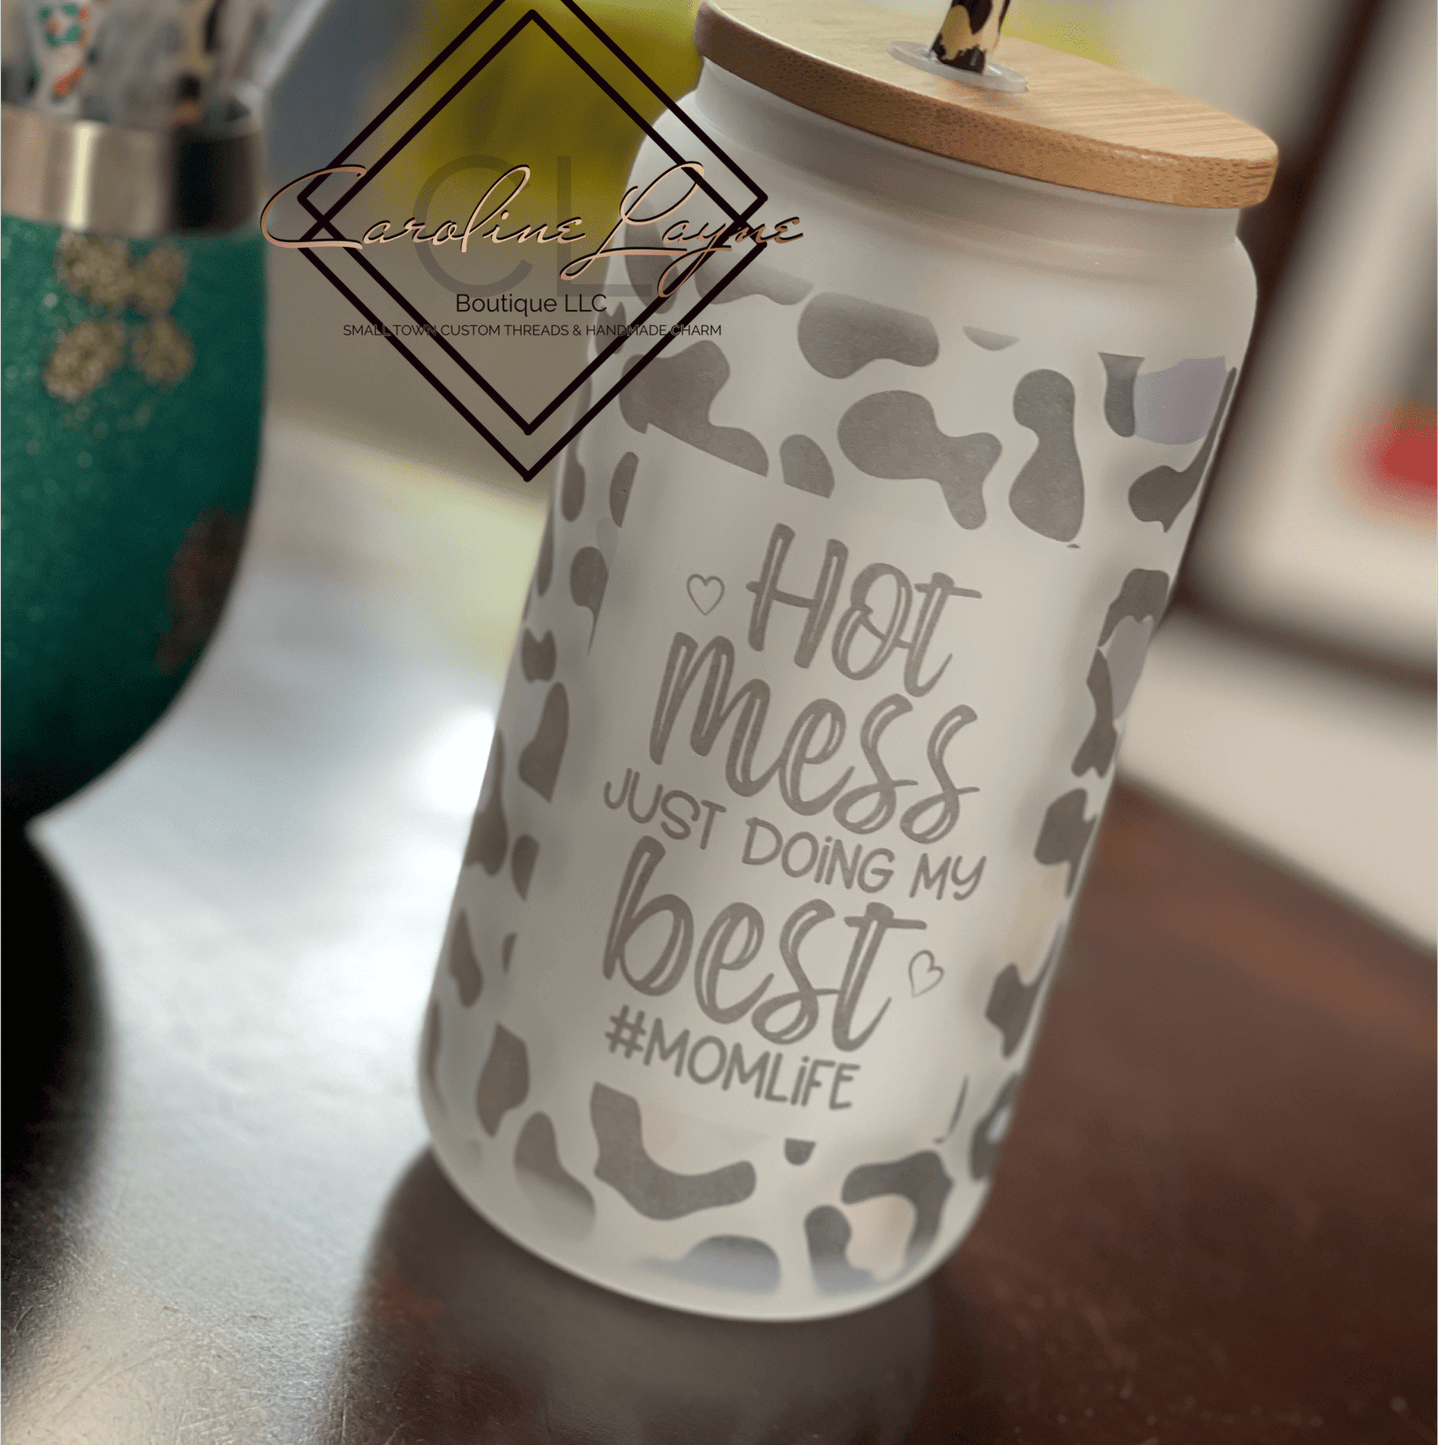 Hot Mess Just Doing My Best #Momlife Glass Can Bamboo Lid - Caroline Layne Boutique LLC